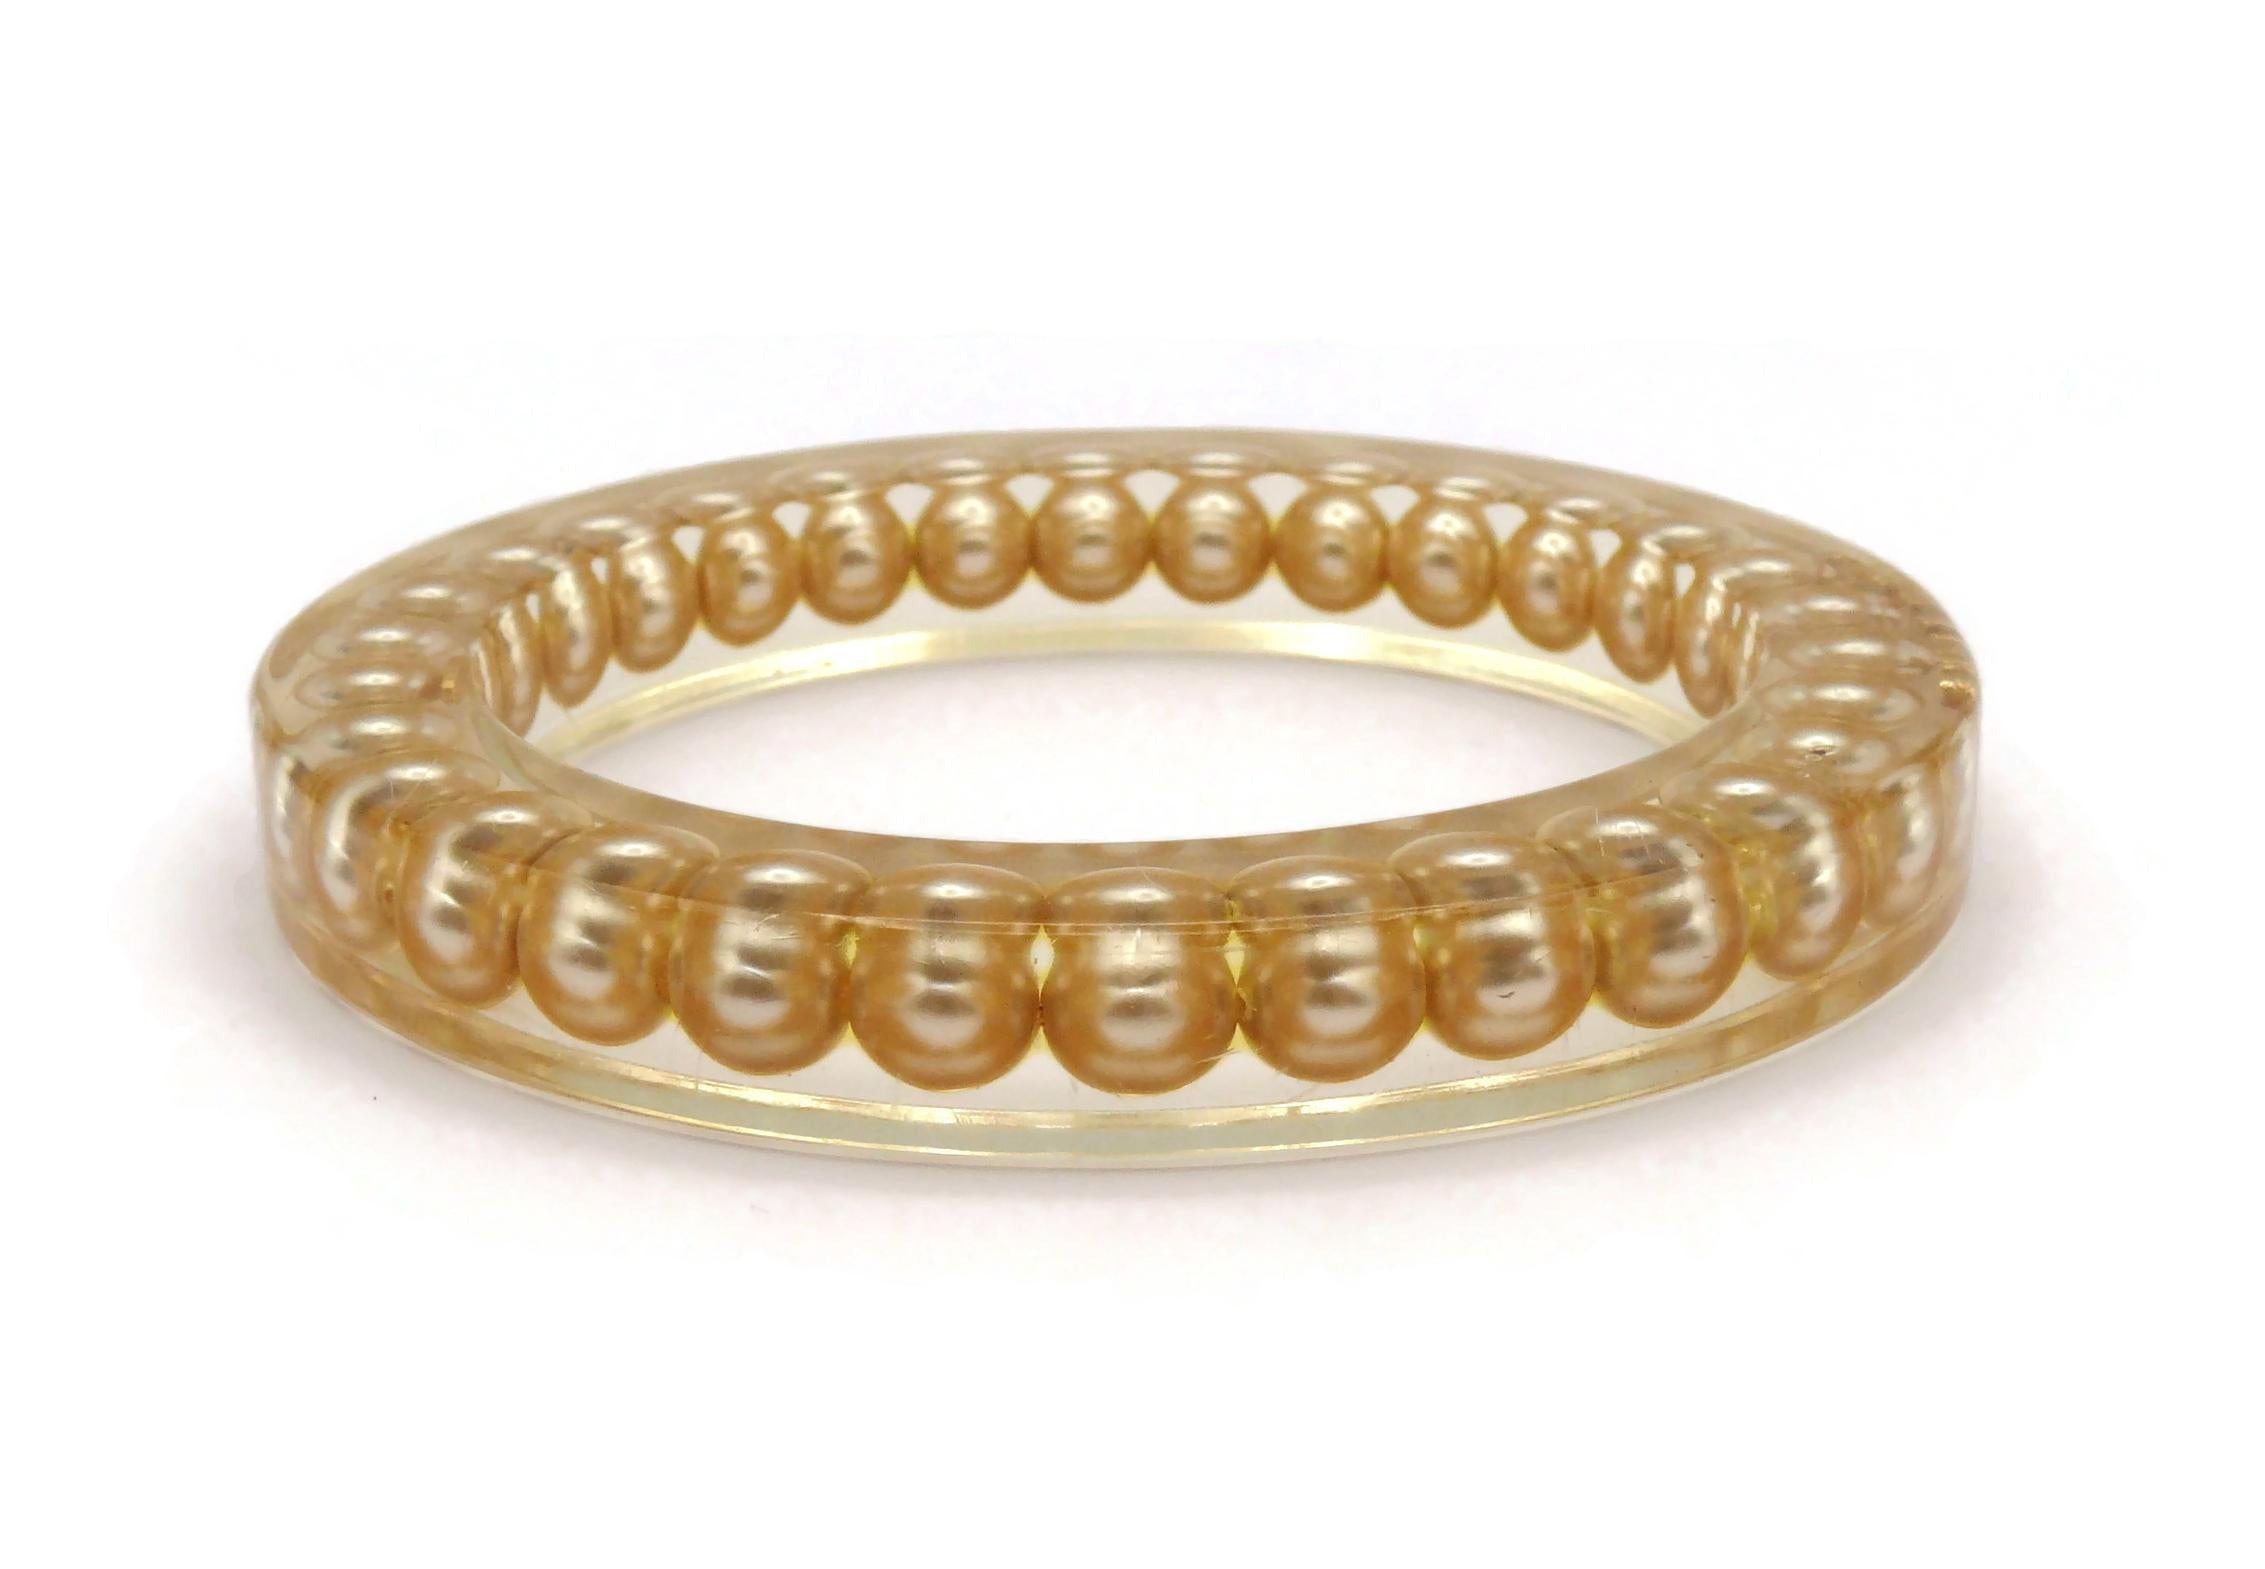 CHANEL by KARL LAGERFELD Vintage Lucite Pearl Inlaid Bangle, Spring 1997 For Sale 4